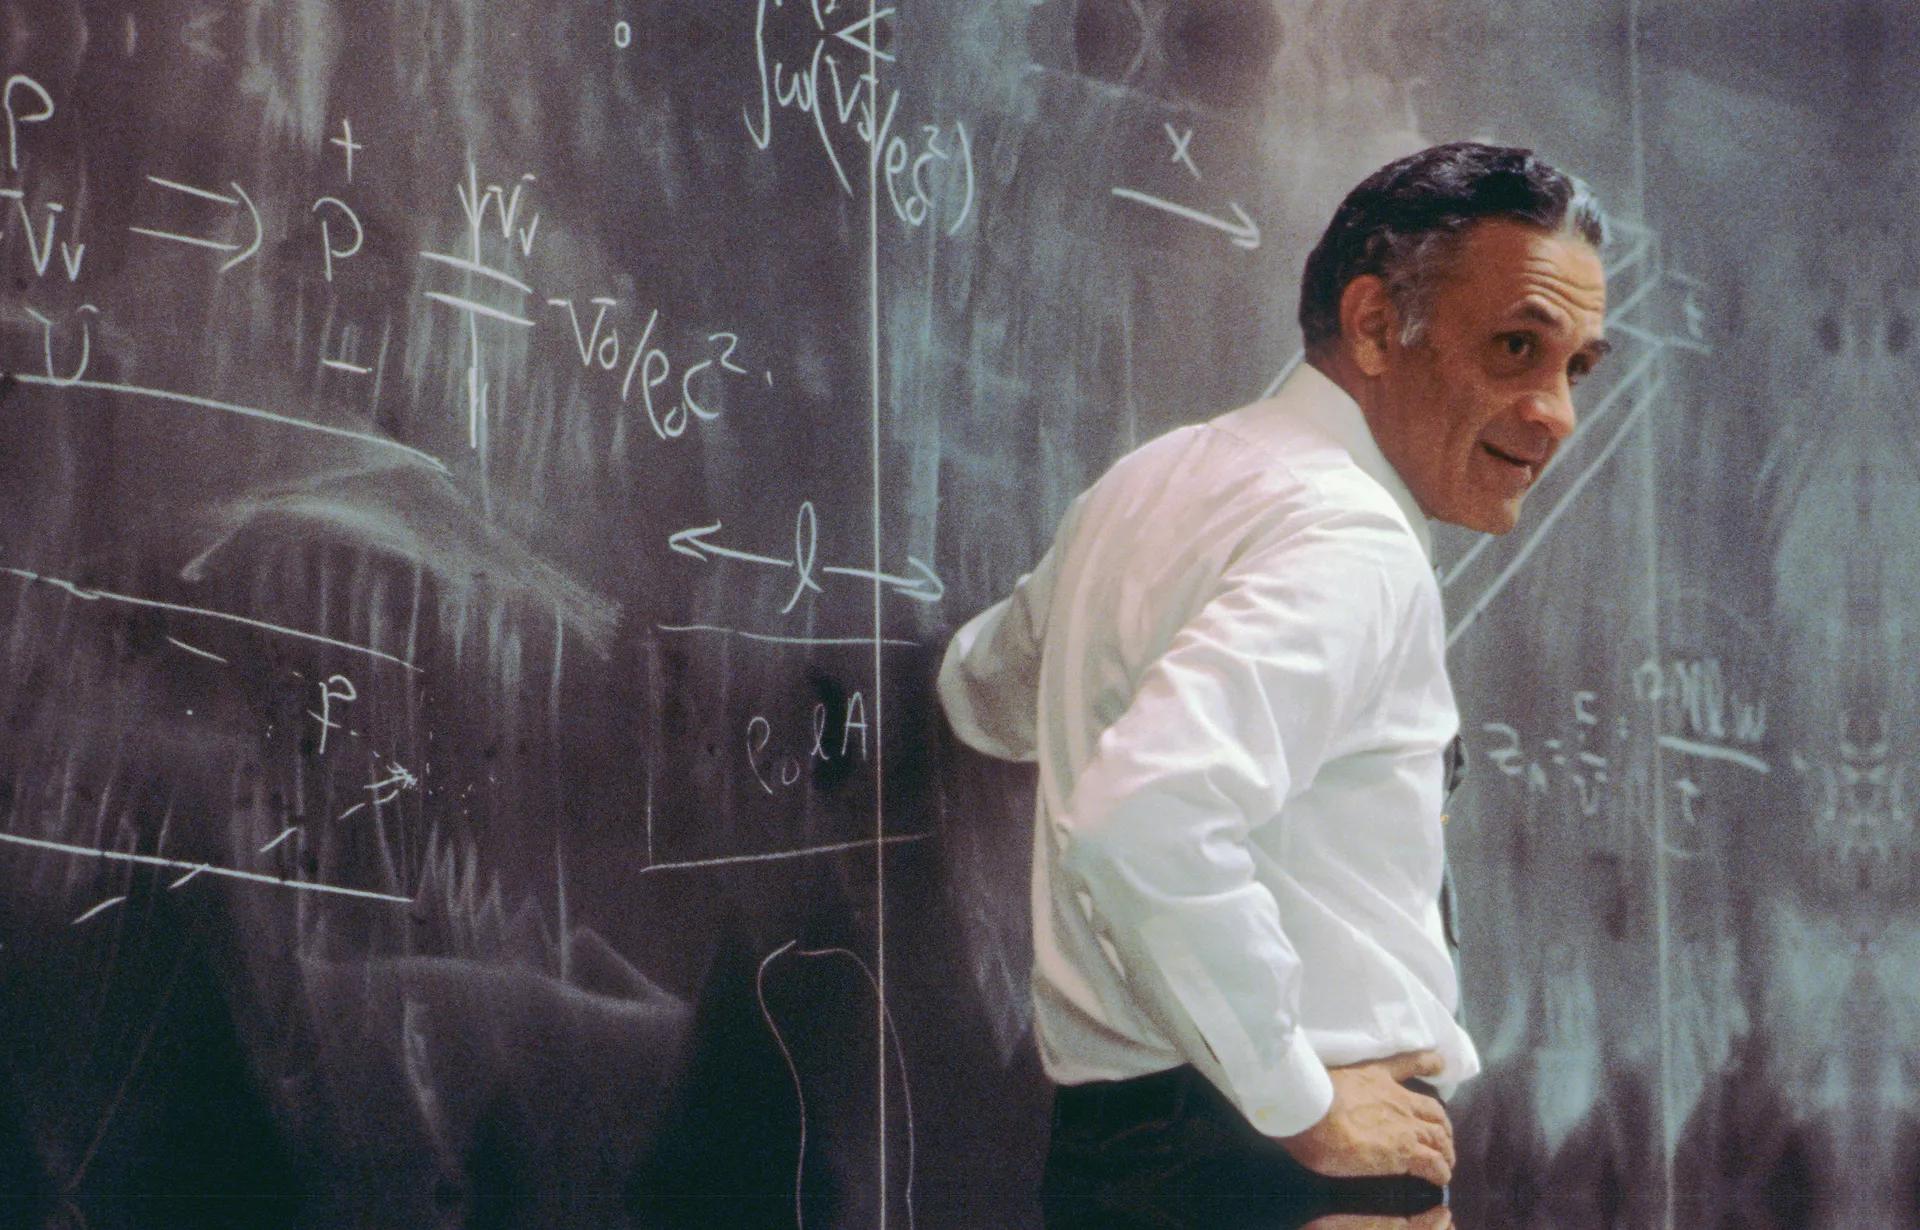 Dr. Bose in front of a blackboard